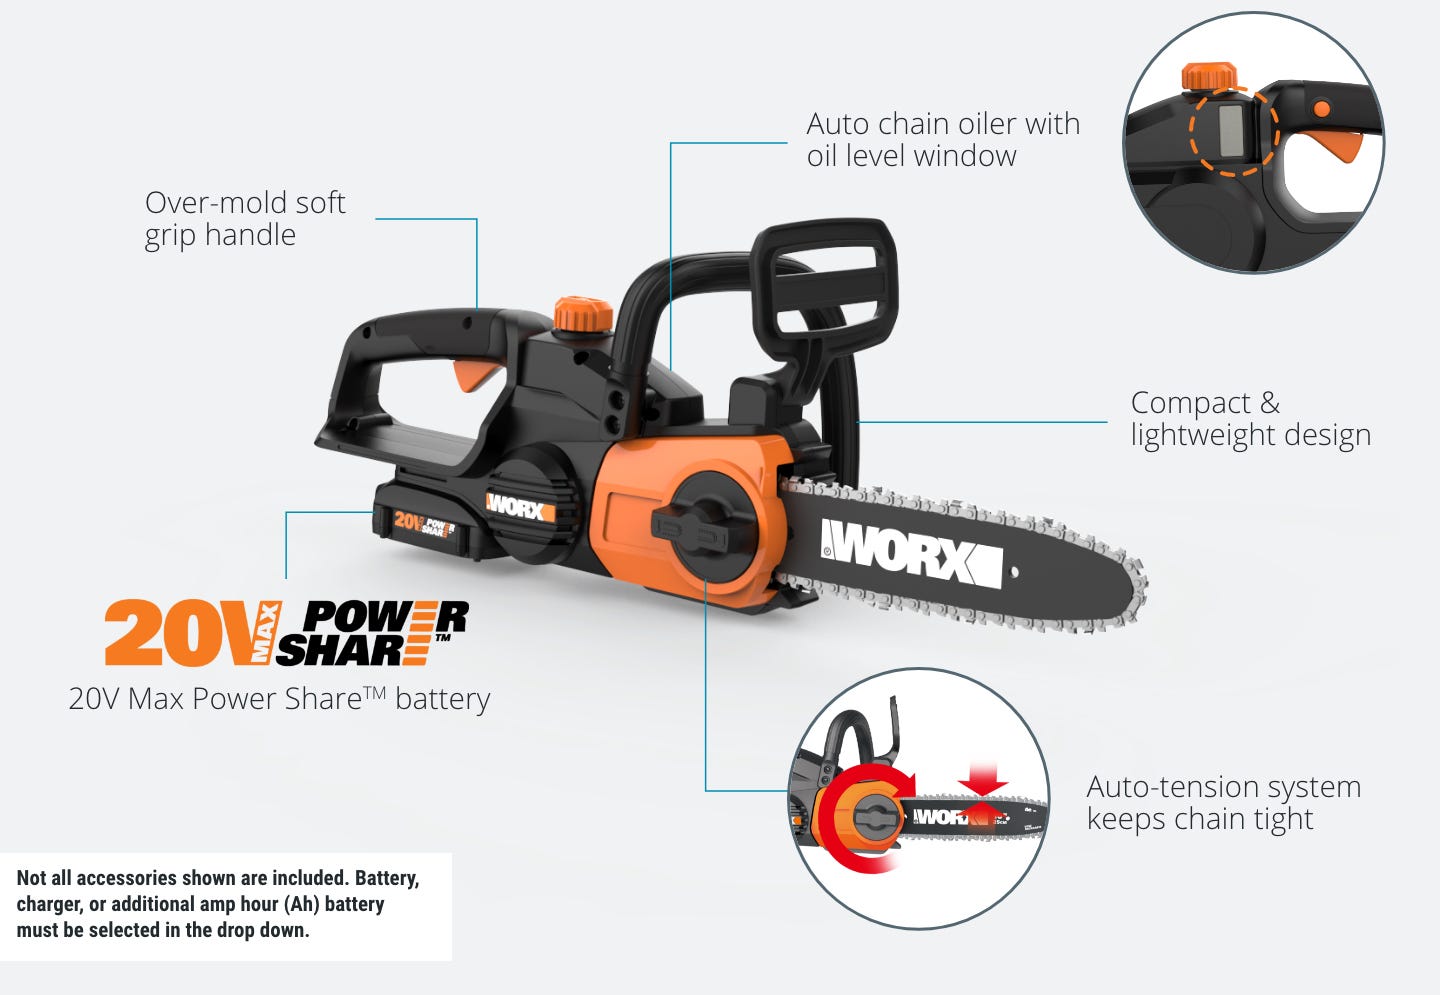 chain saw featuring: over mold soft grip handle, auto chain oiler with oil level window, compact and lightweight design, auto tension system, part of the power share platform